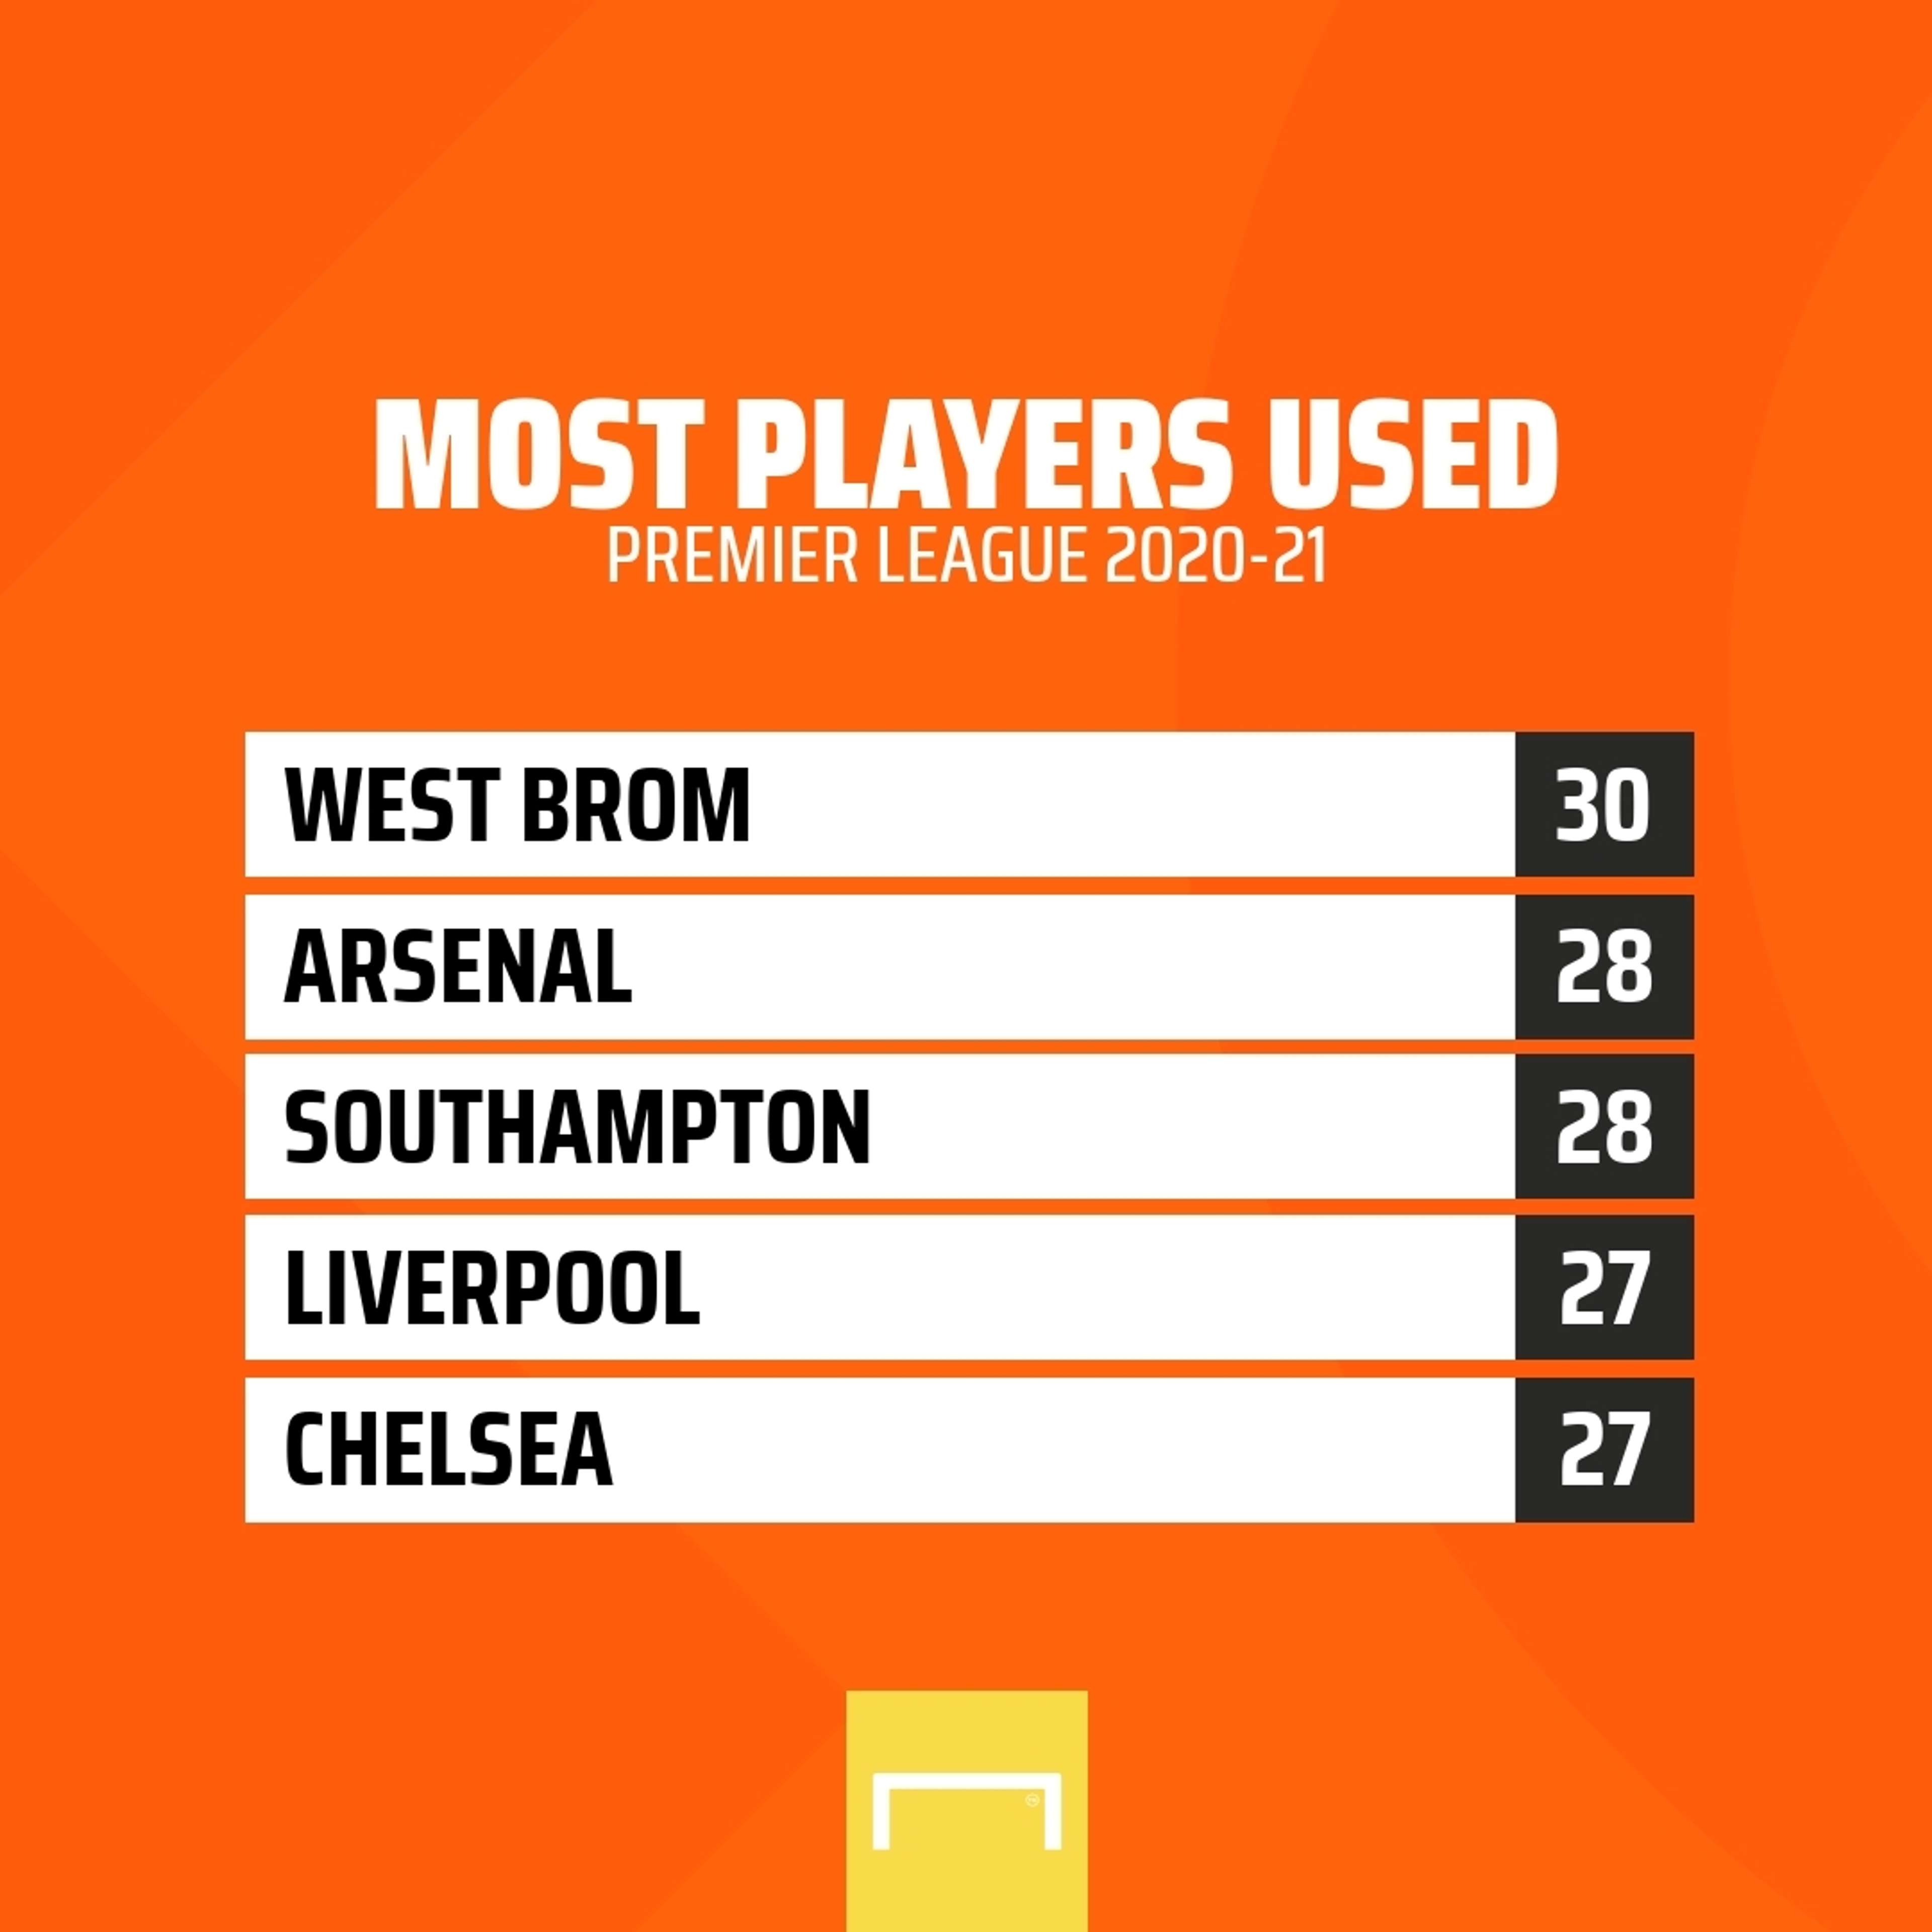 Premier League most players used